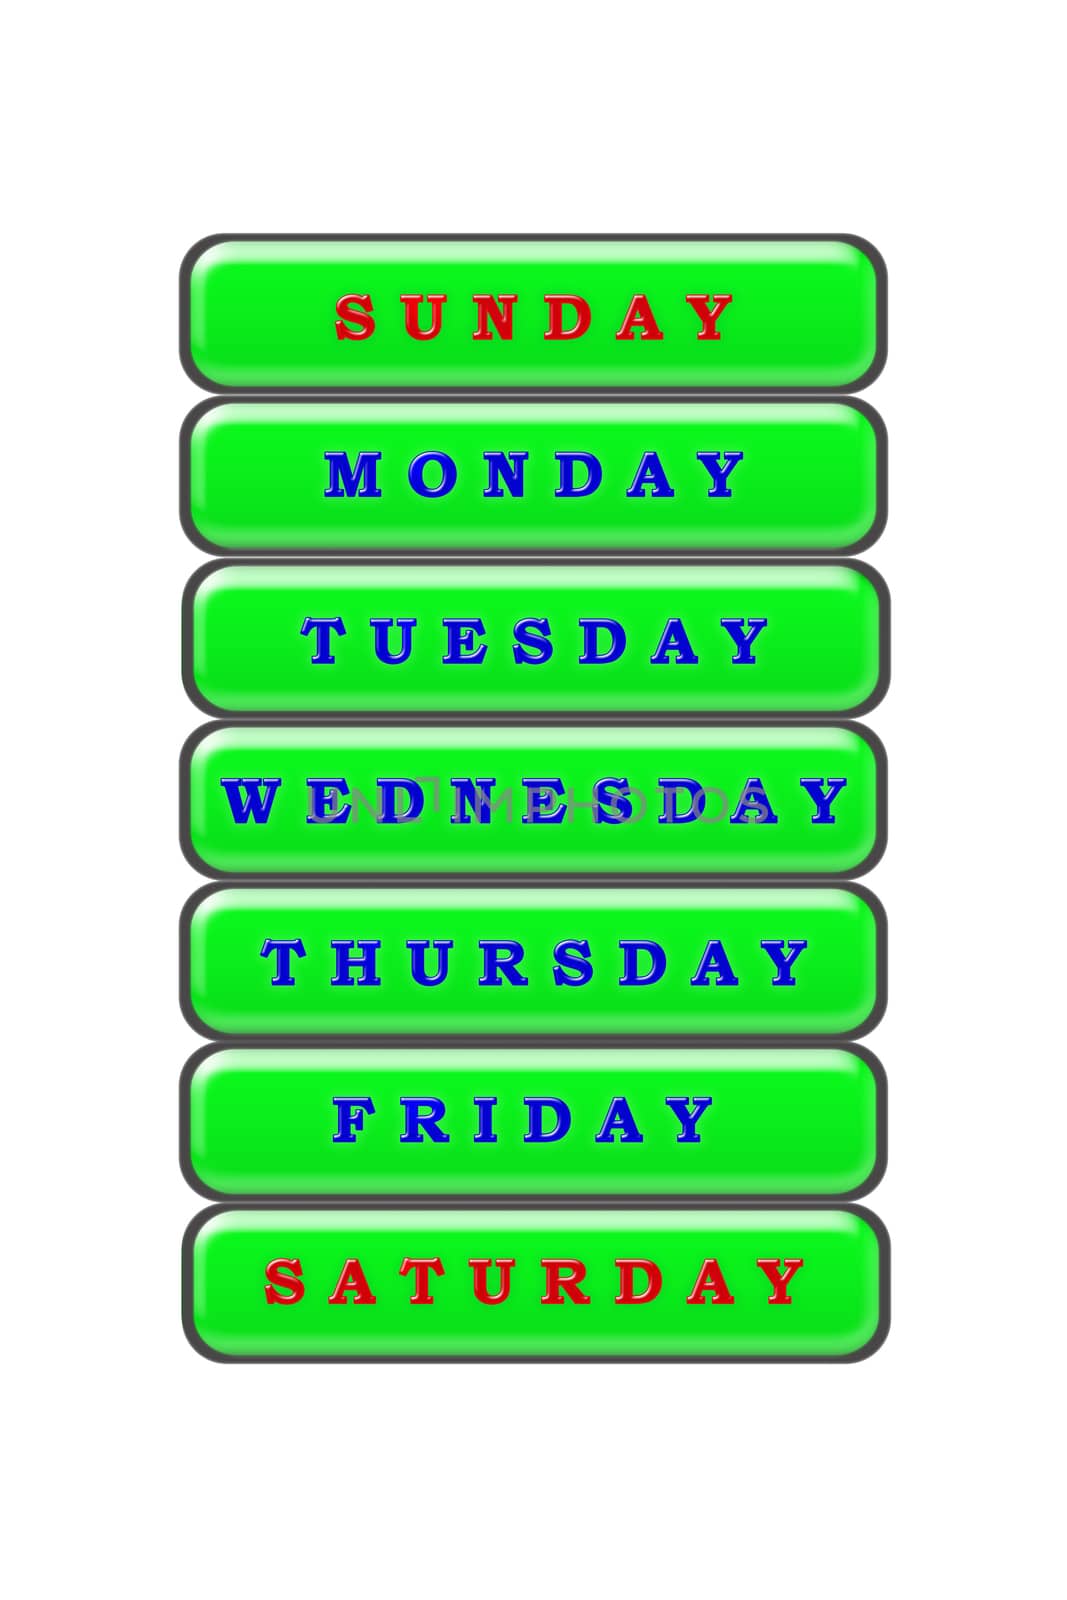 Among the list of days of the week on a green background, Sunday and Saturday are highlighted in red the rest of the days are highlighted in blue.